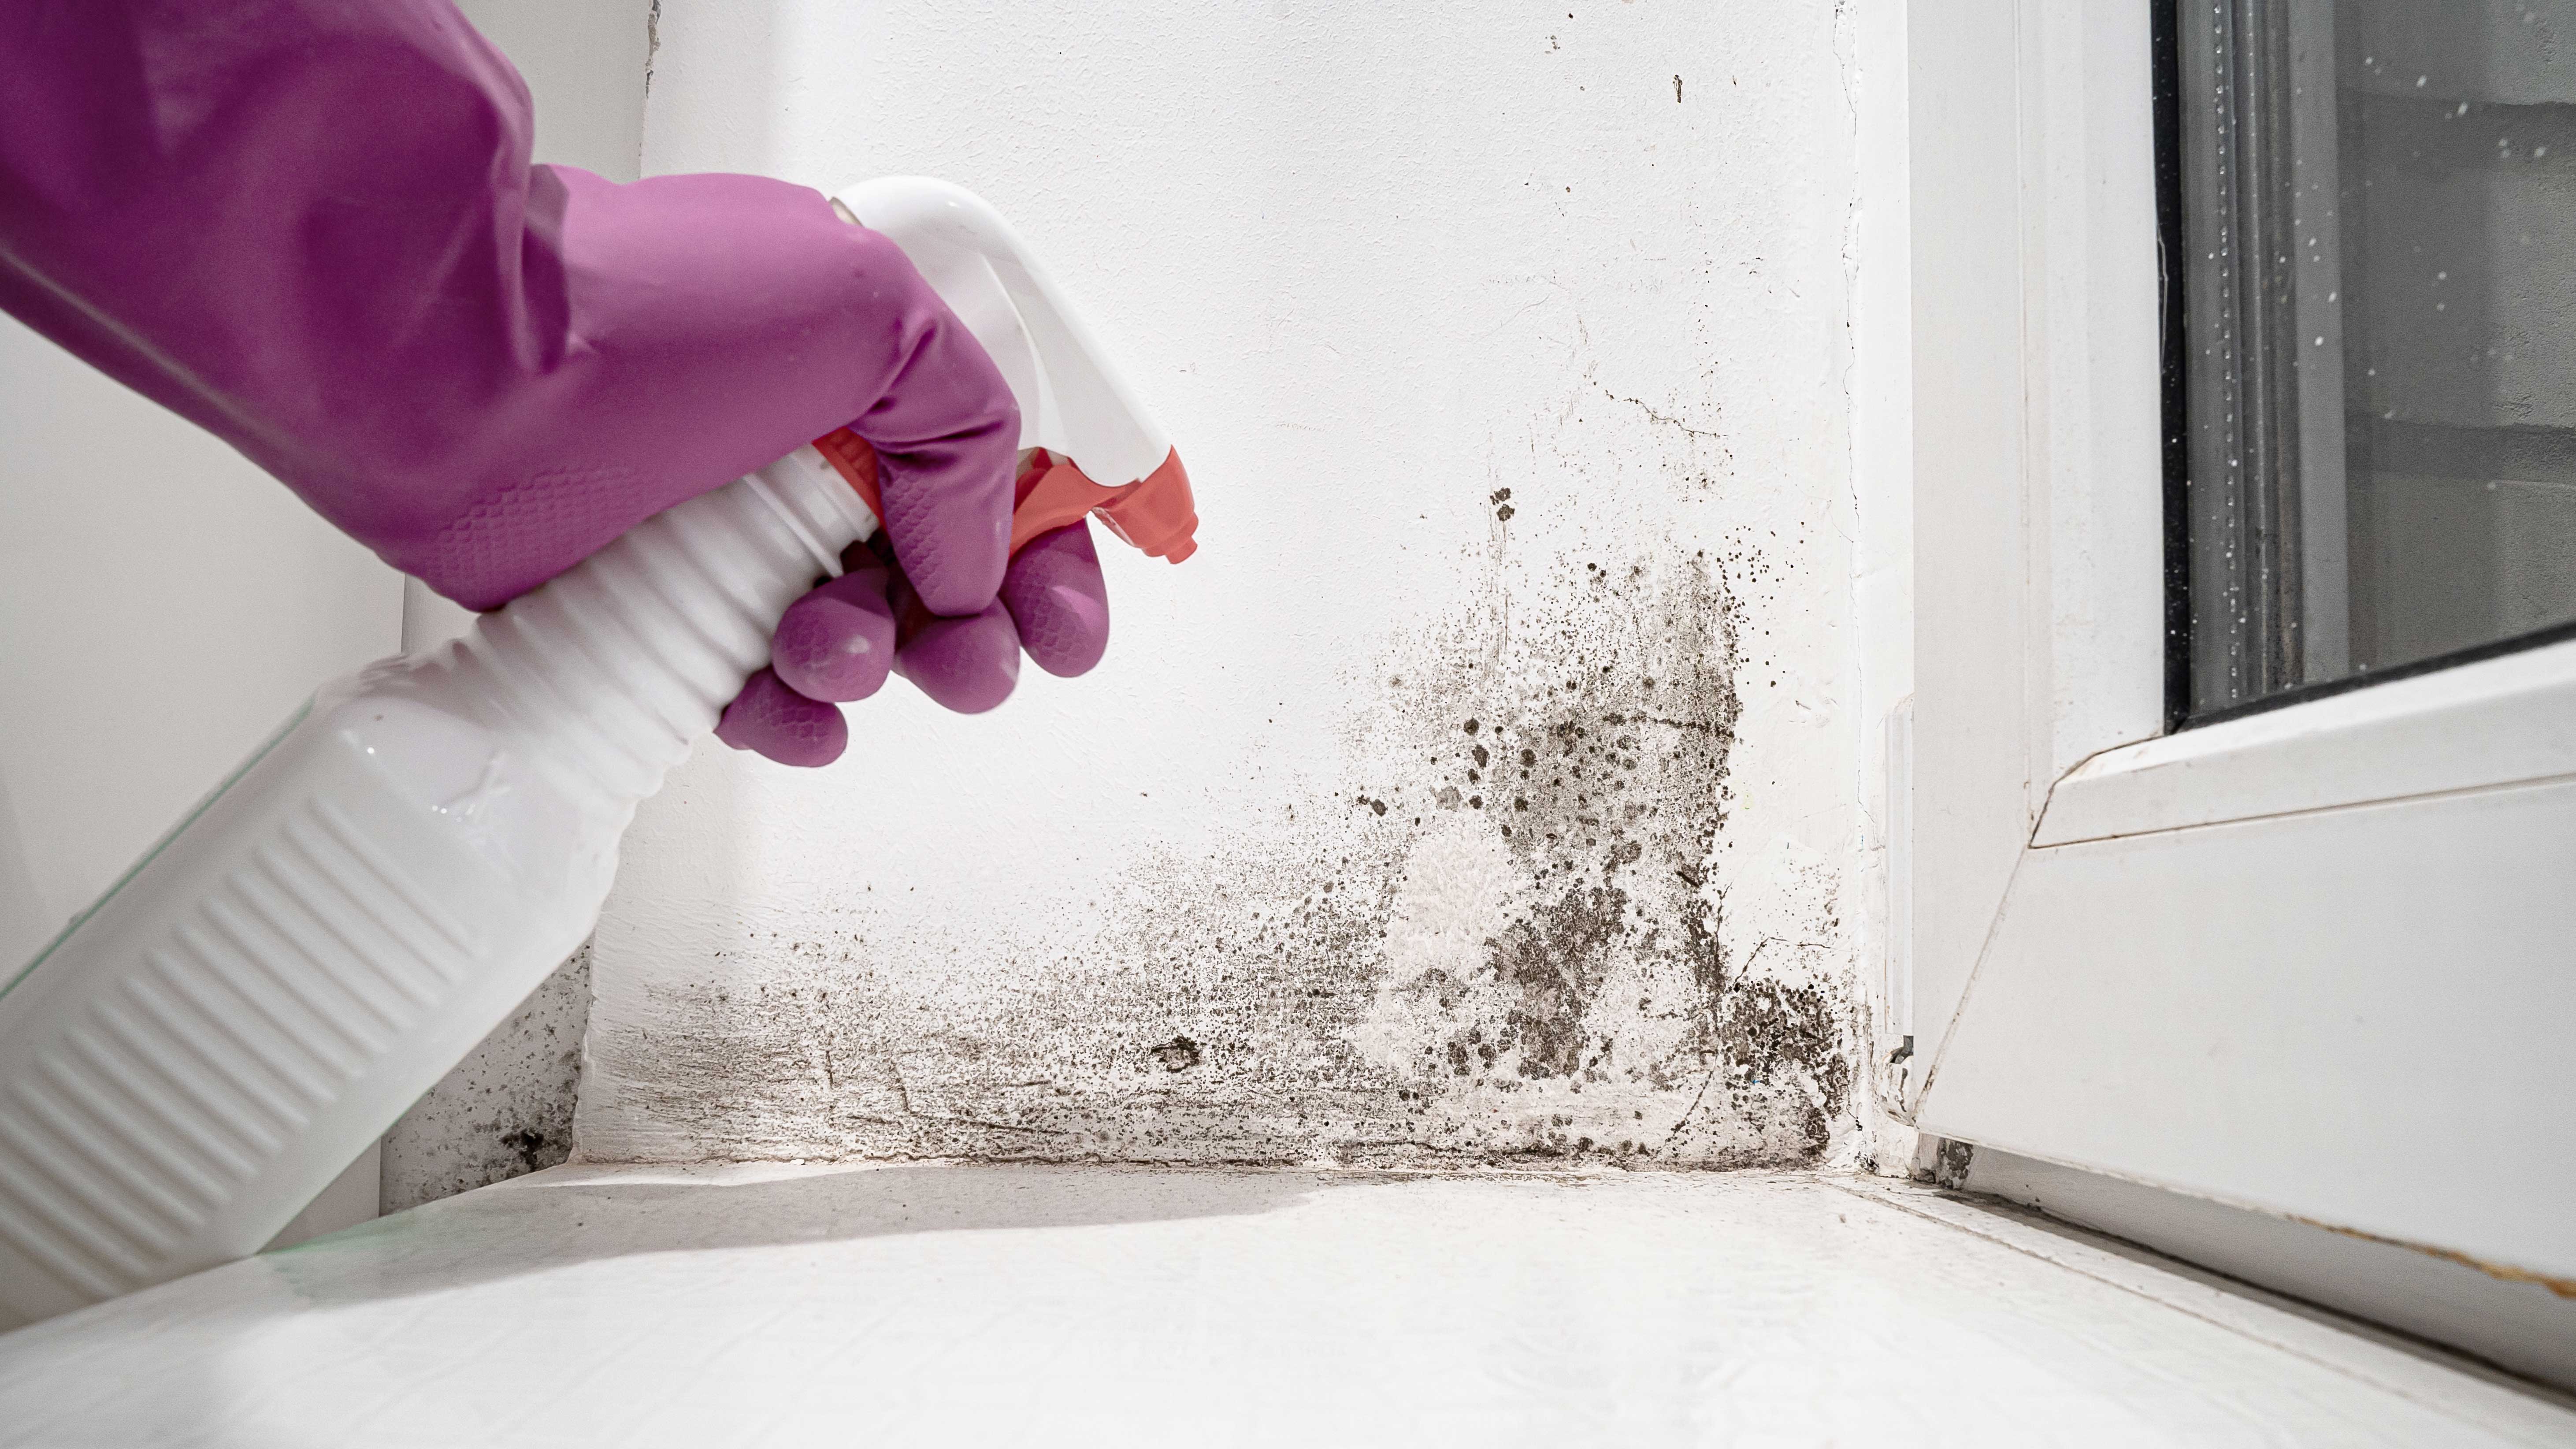 Guide To Killing Black Mold